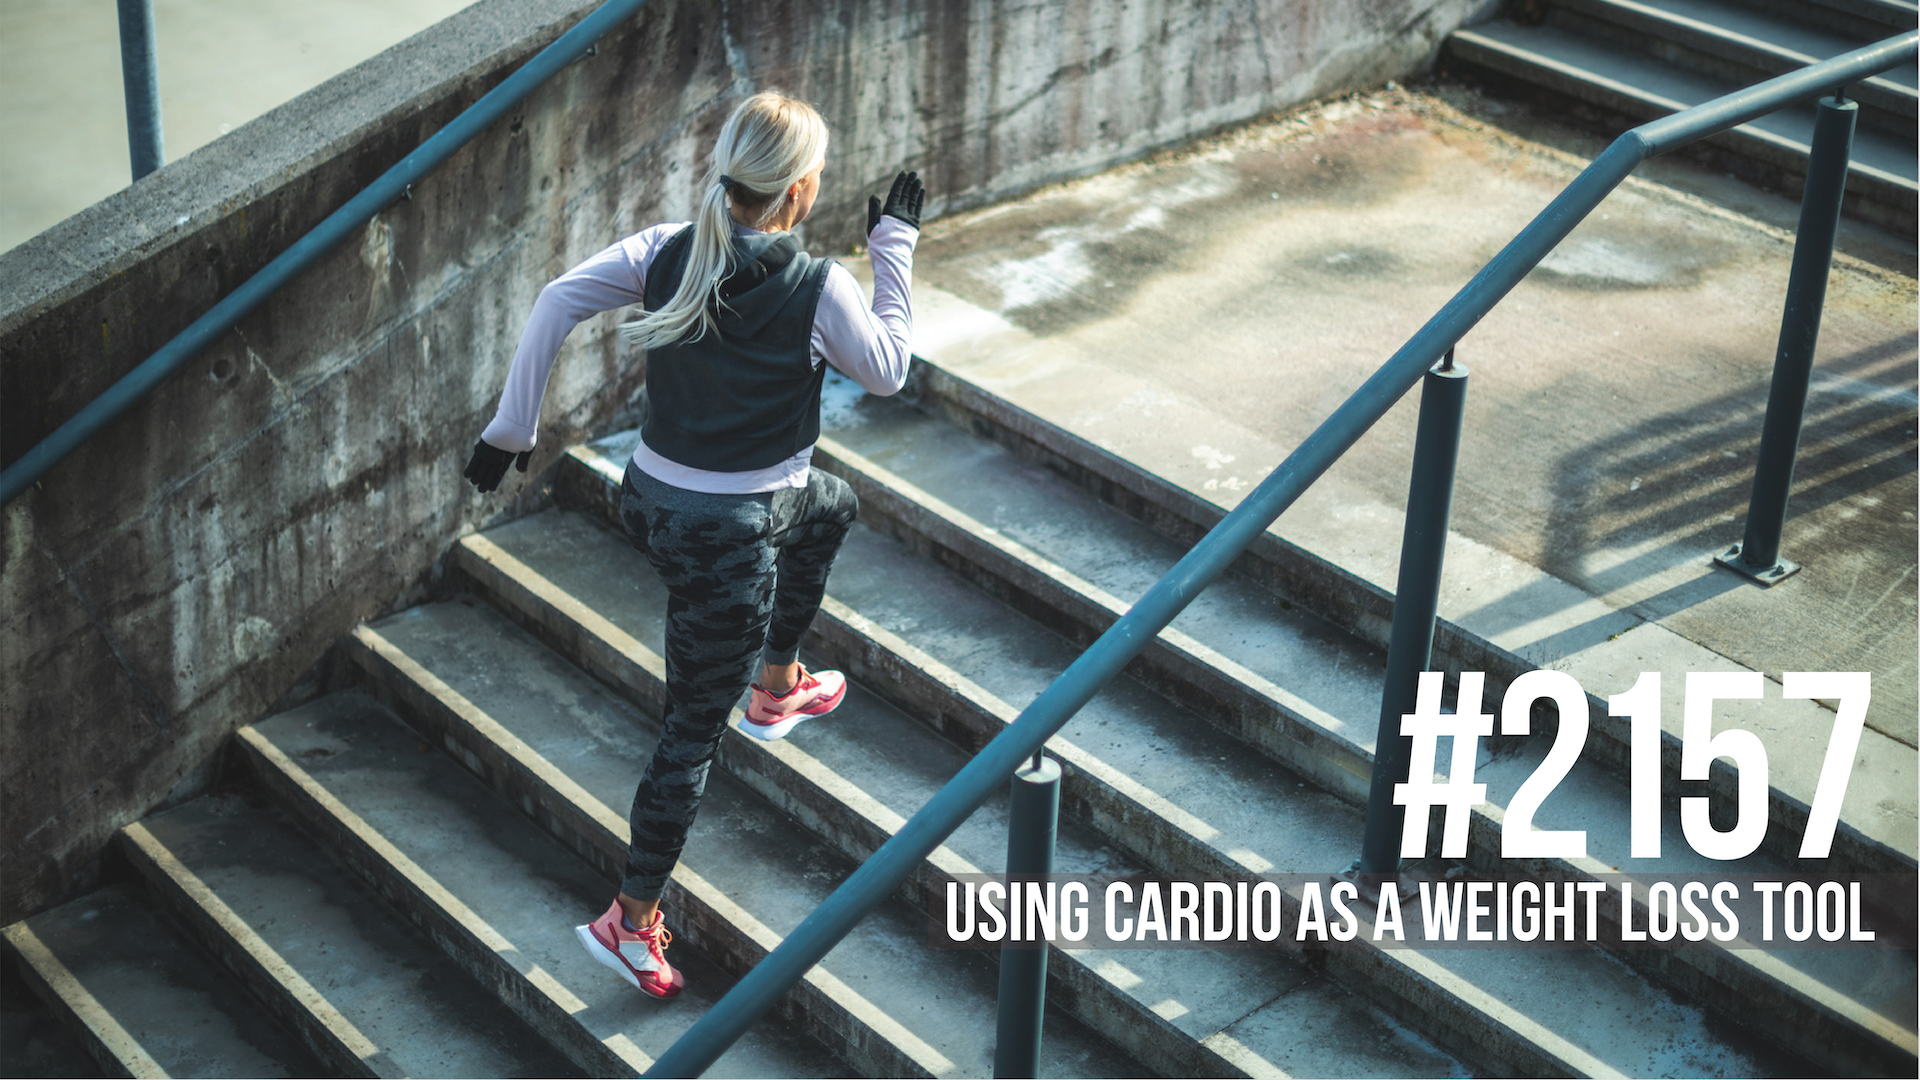 2157: Using Cardio as a Weight Loss Tool